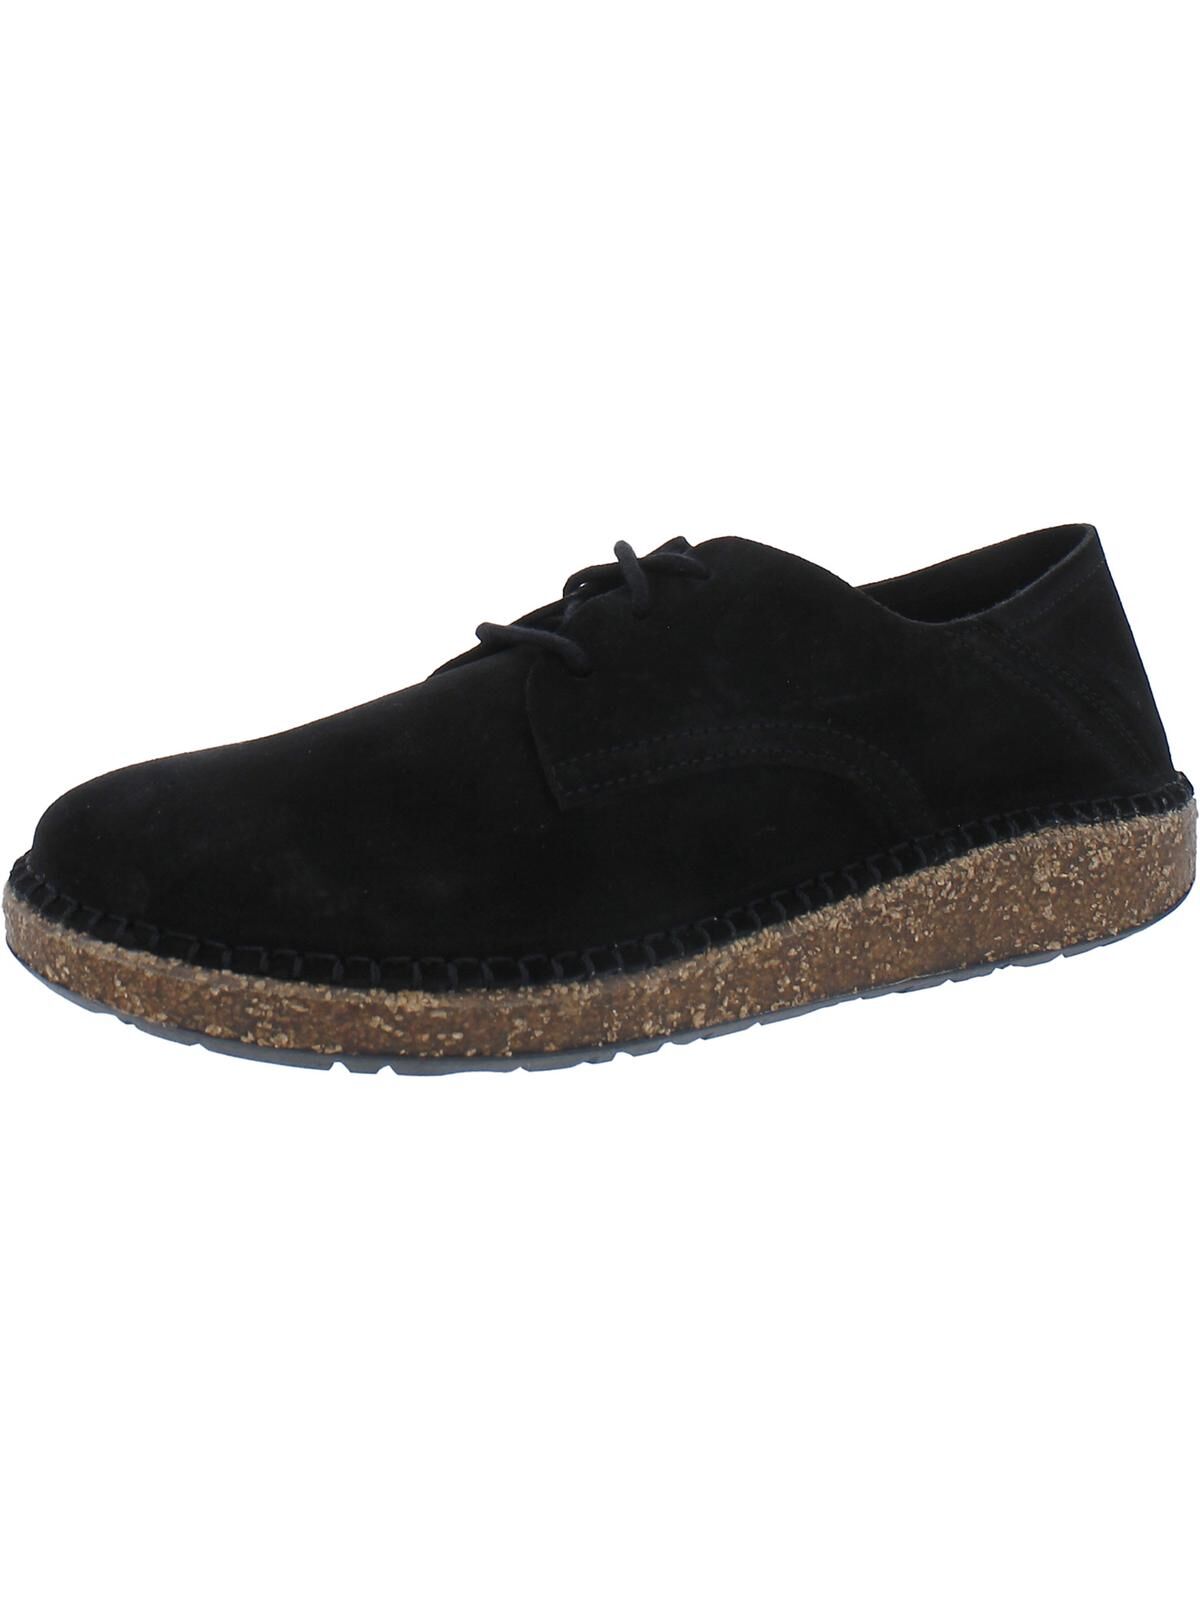 Birkenstock Gary Mens Suede Lace Up Derby Shoes EU 39 male